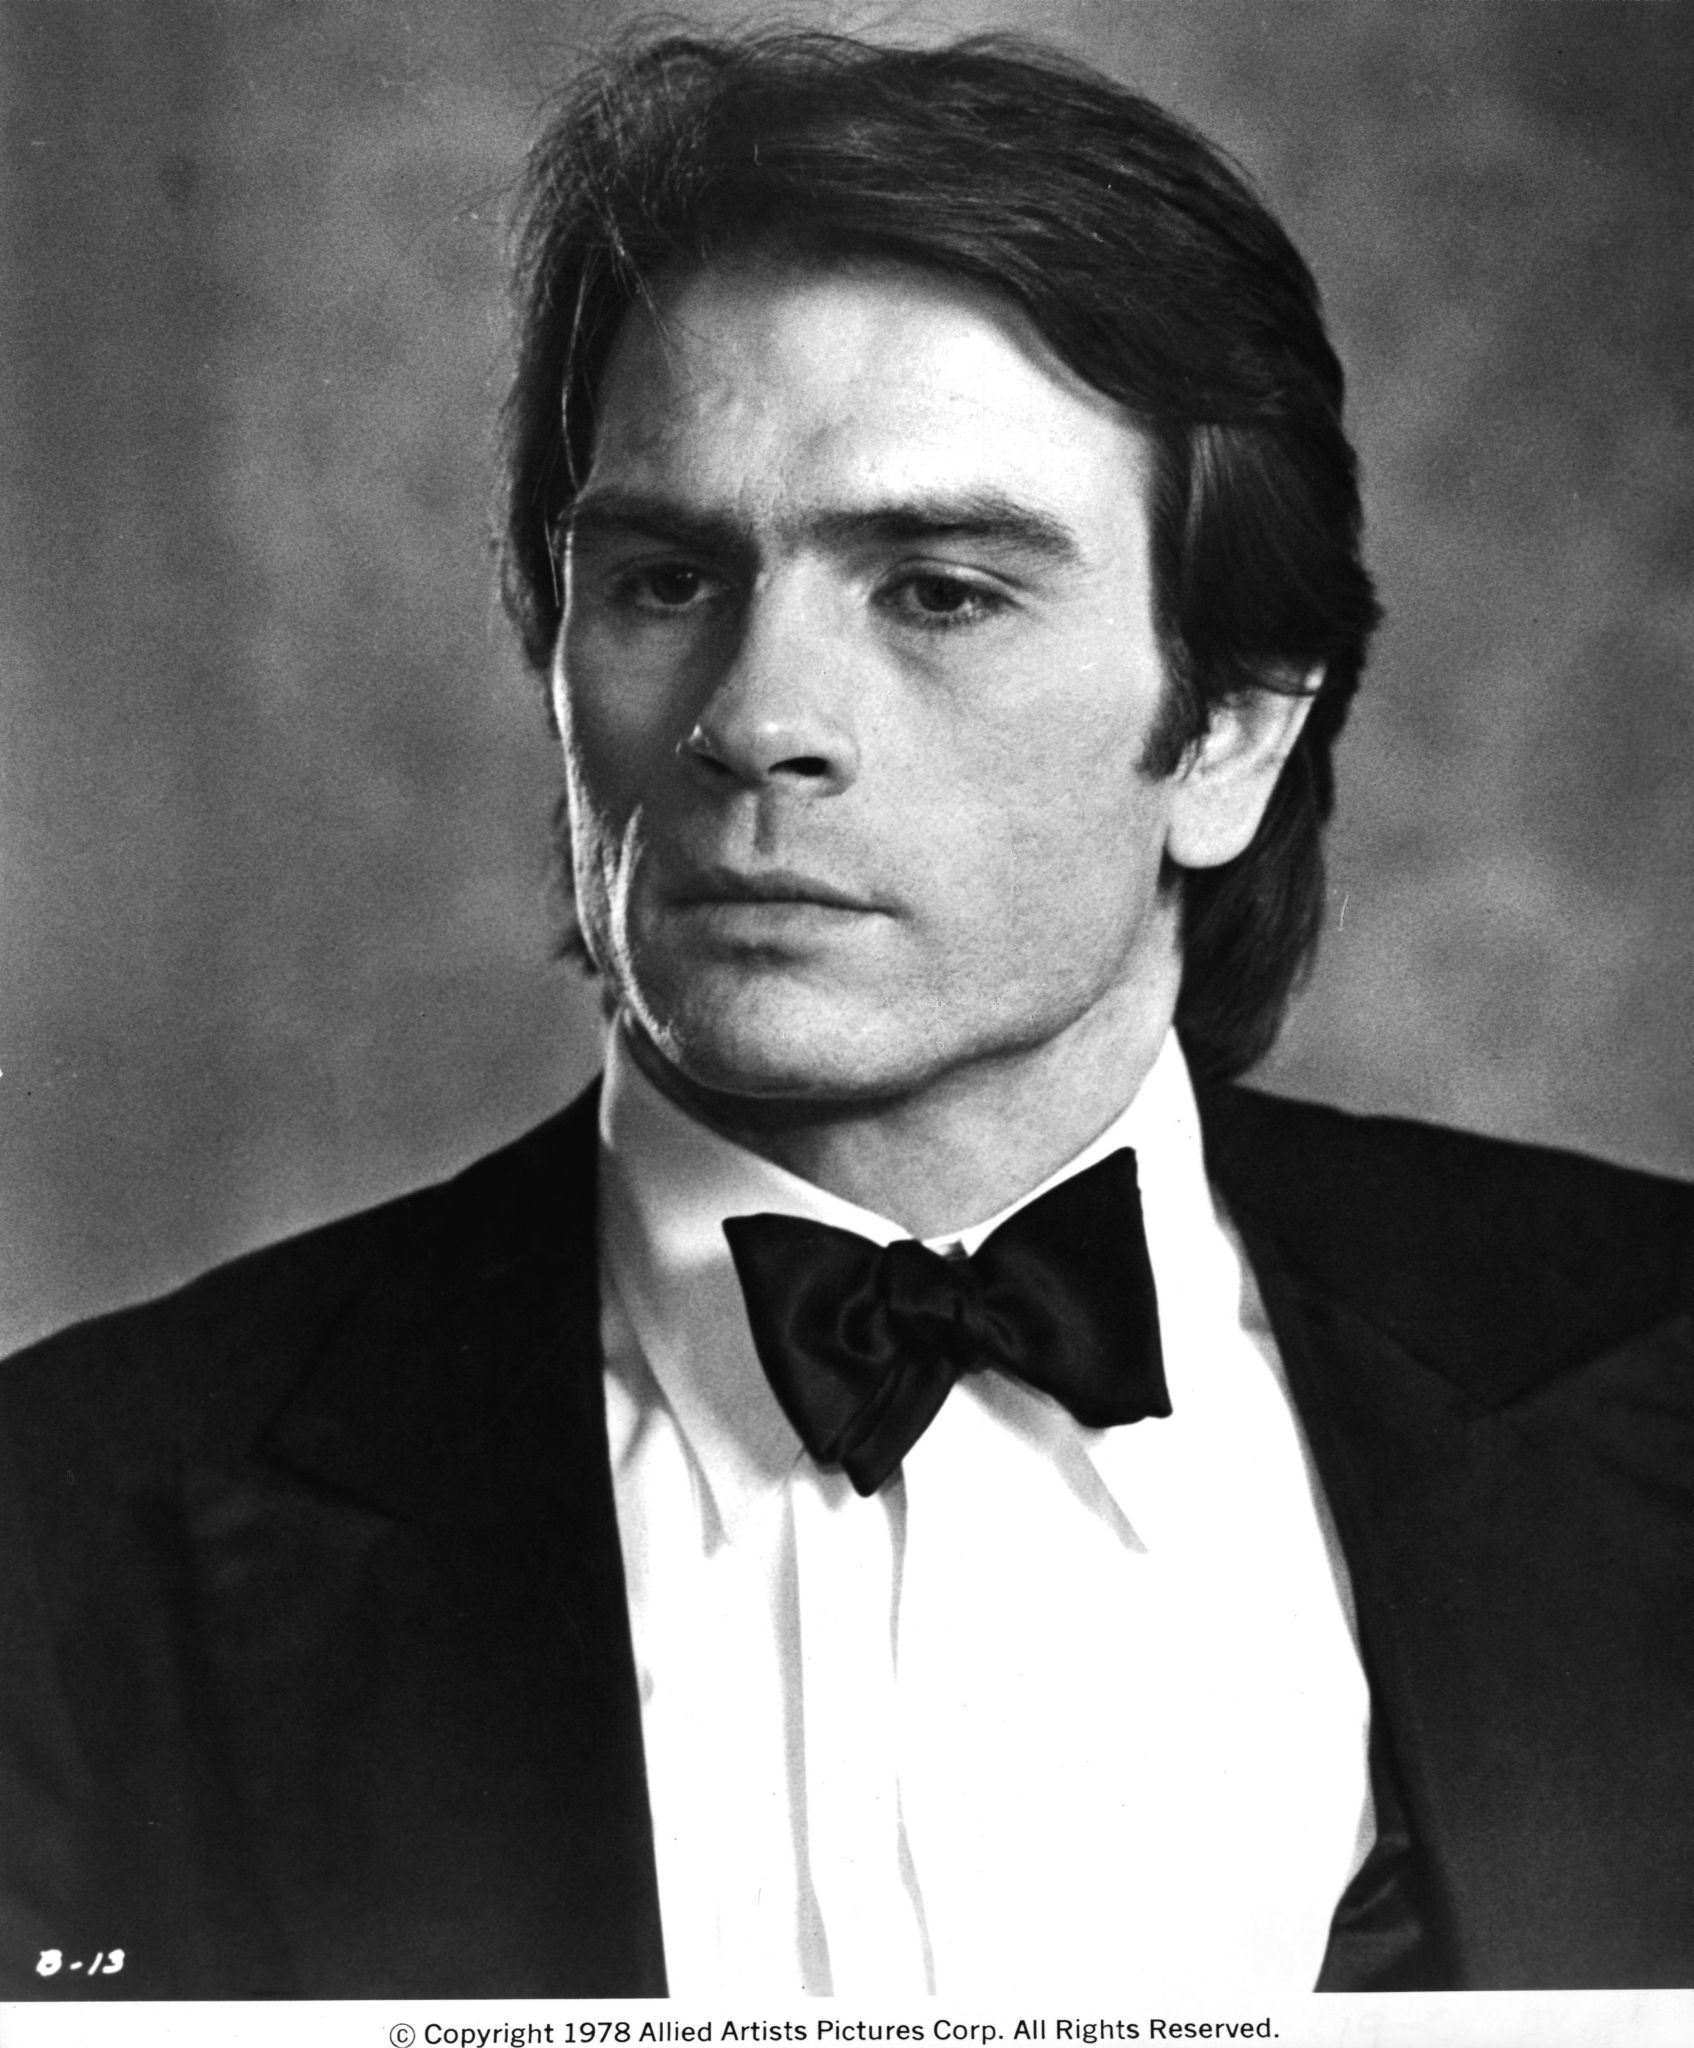 Facts to know about Tommy Lee Jones